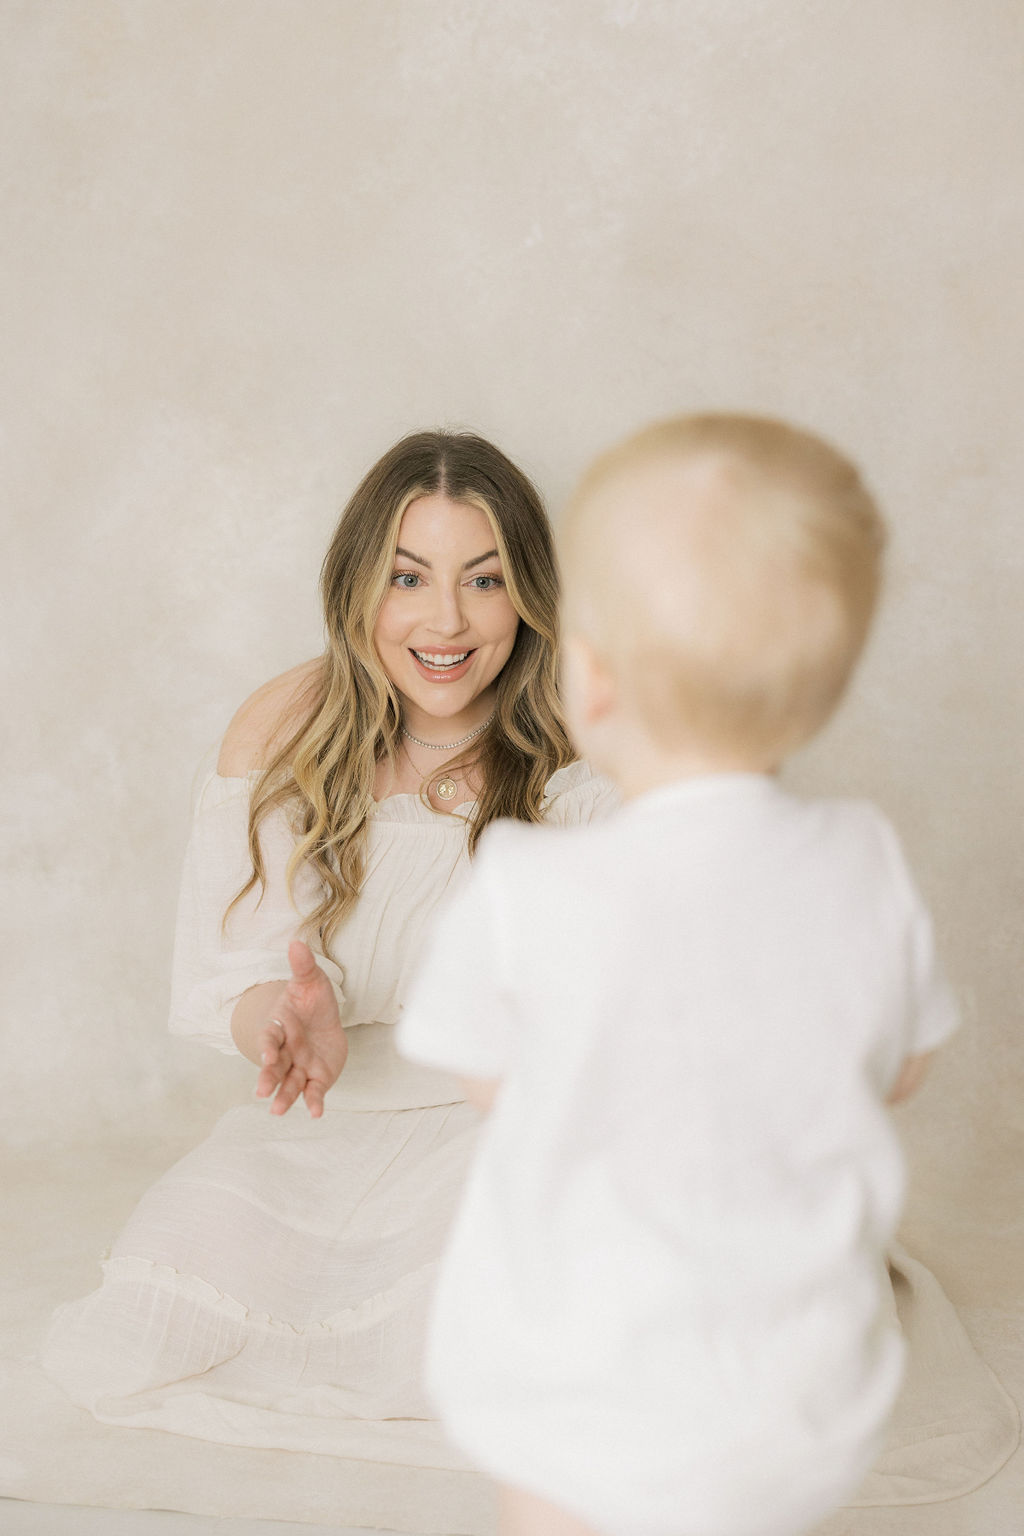 A happy mom in a white dress plays with her toddler son in a studio after using happy family after